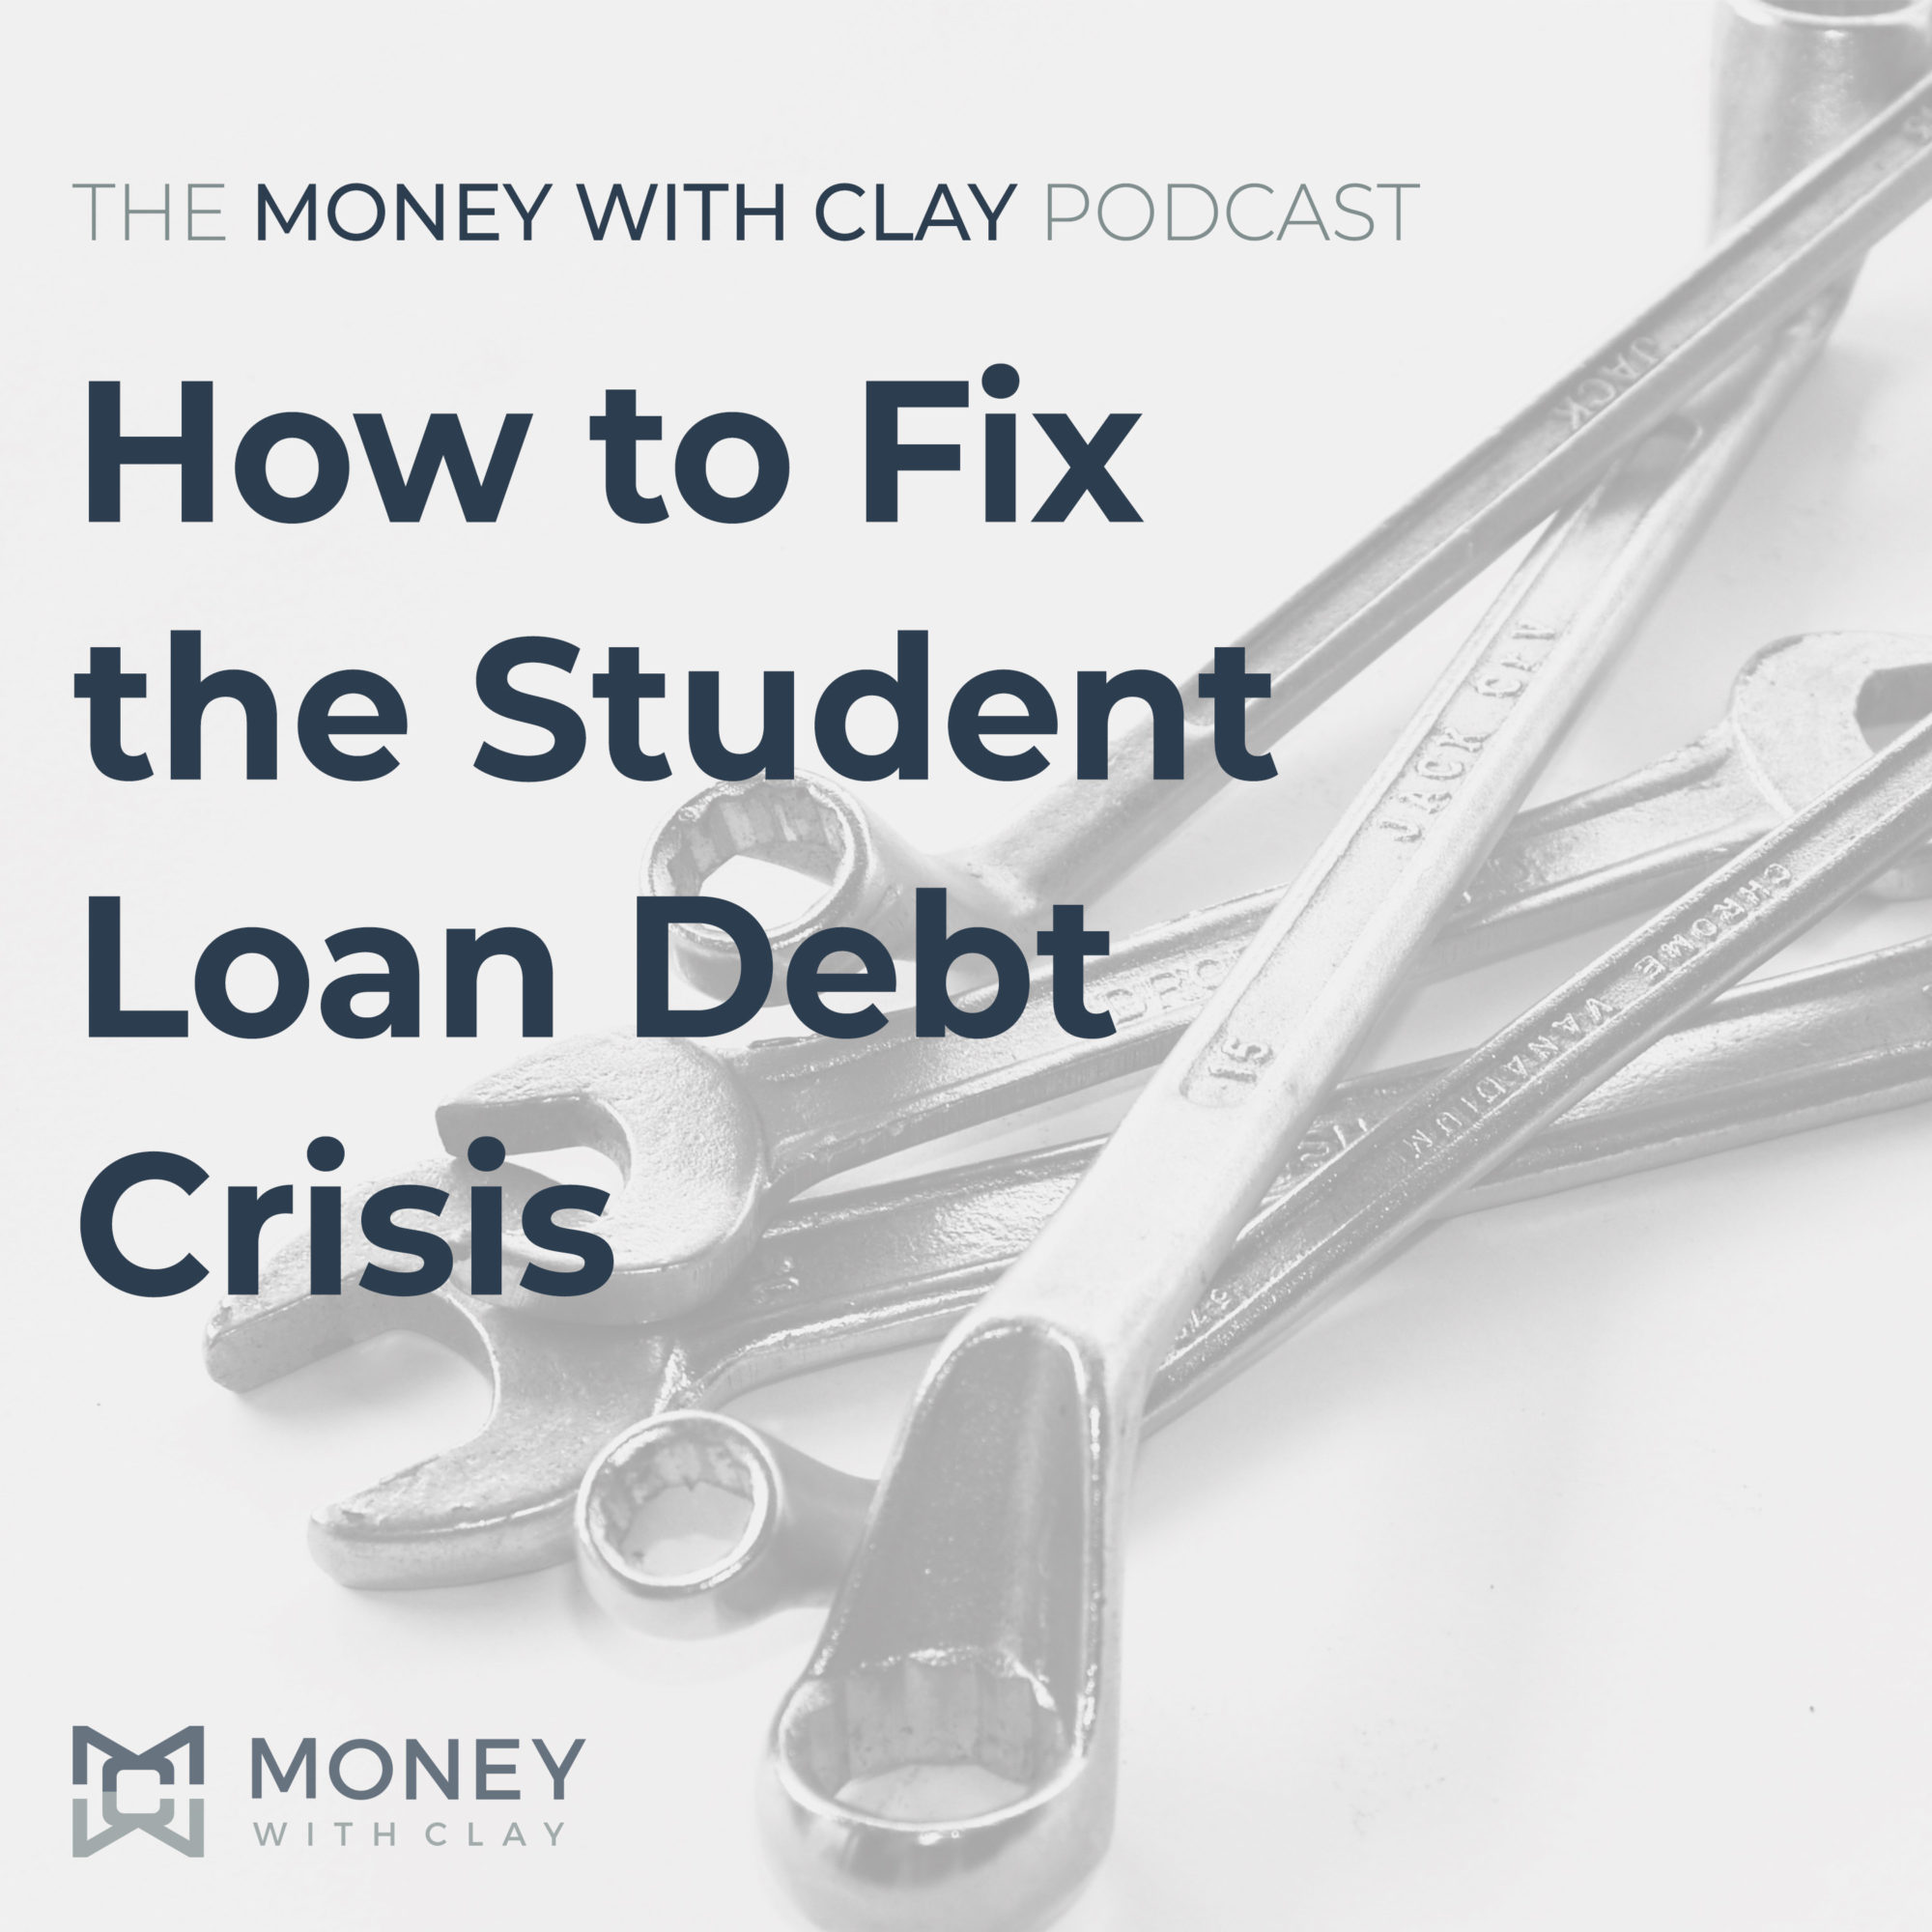 How to Fix Student Loan Debt Problems